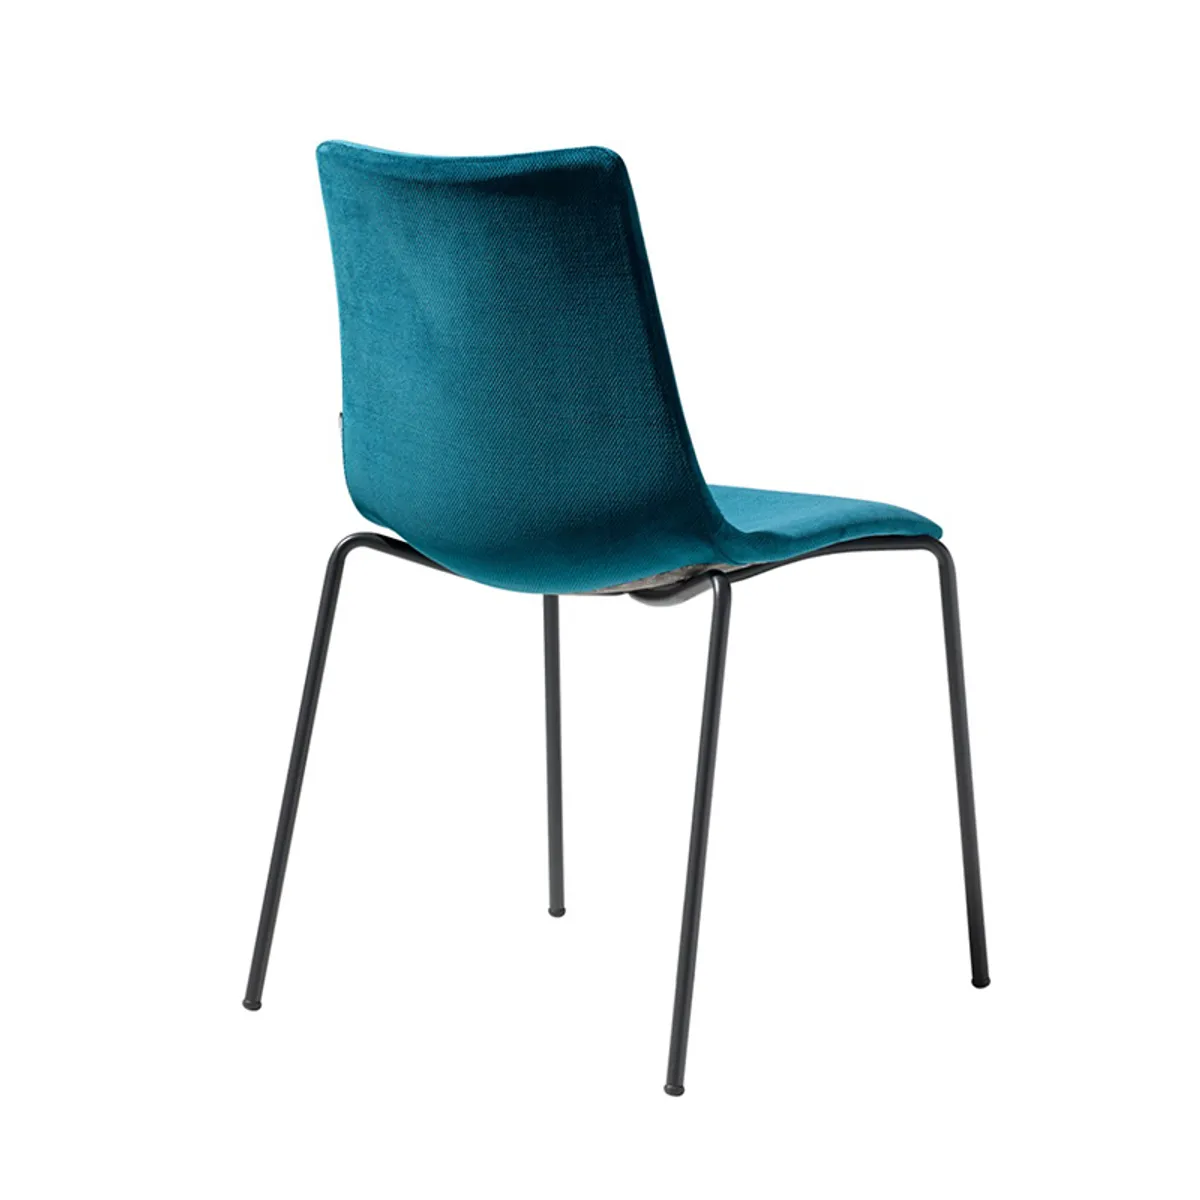 Selina Side Chair With Black Metal Legs And Blue Upholstery For Cafes And Restaurants By Insideoutcotracts